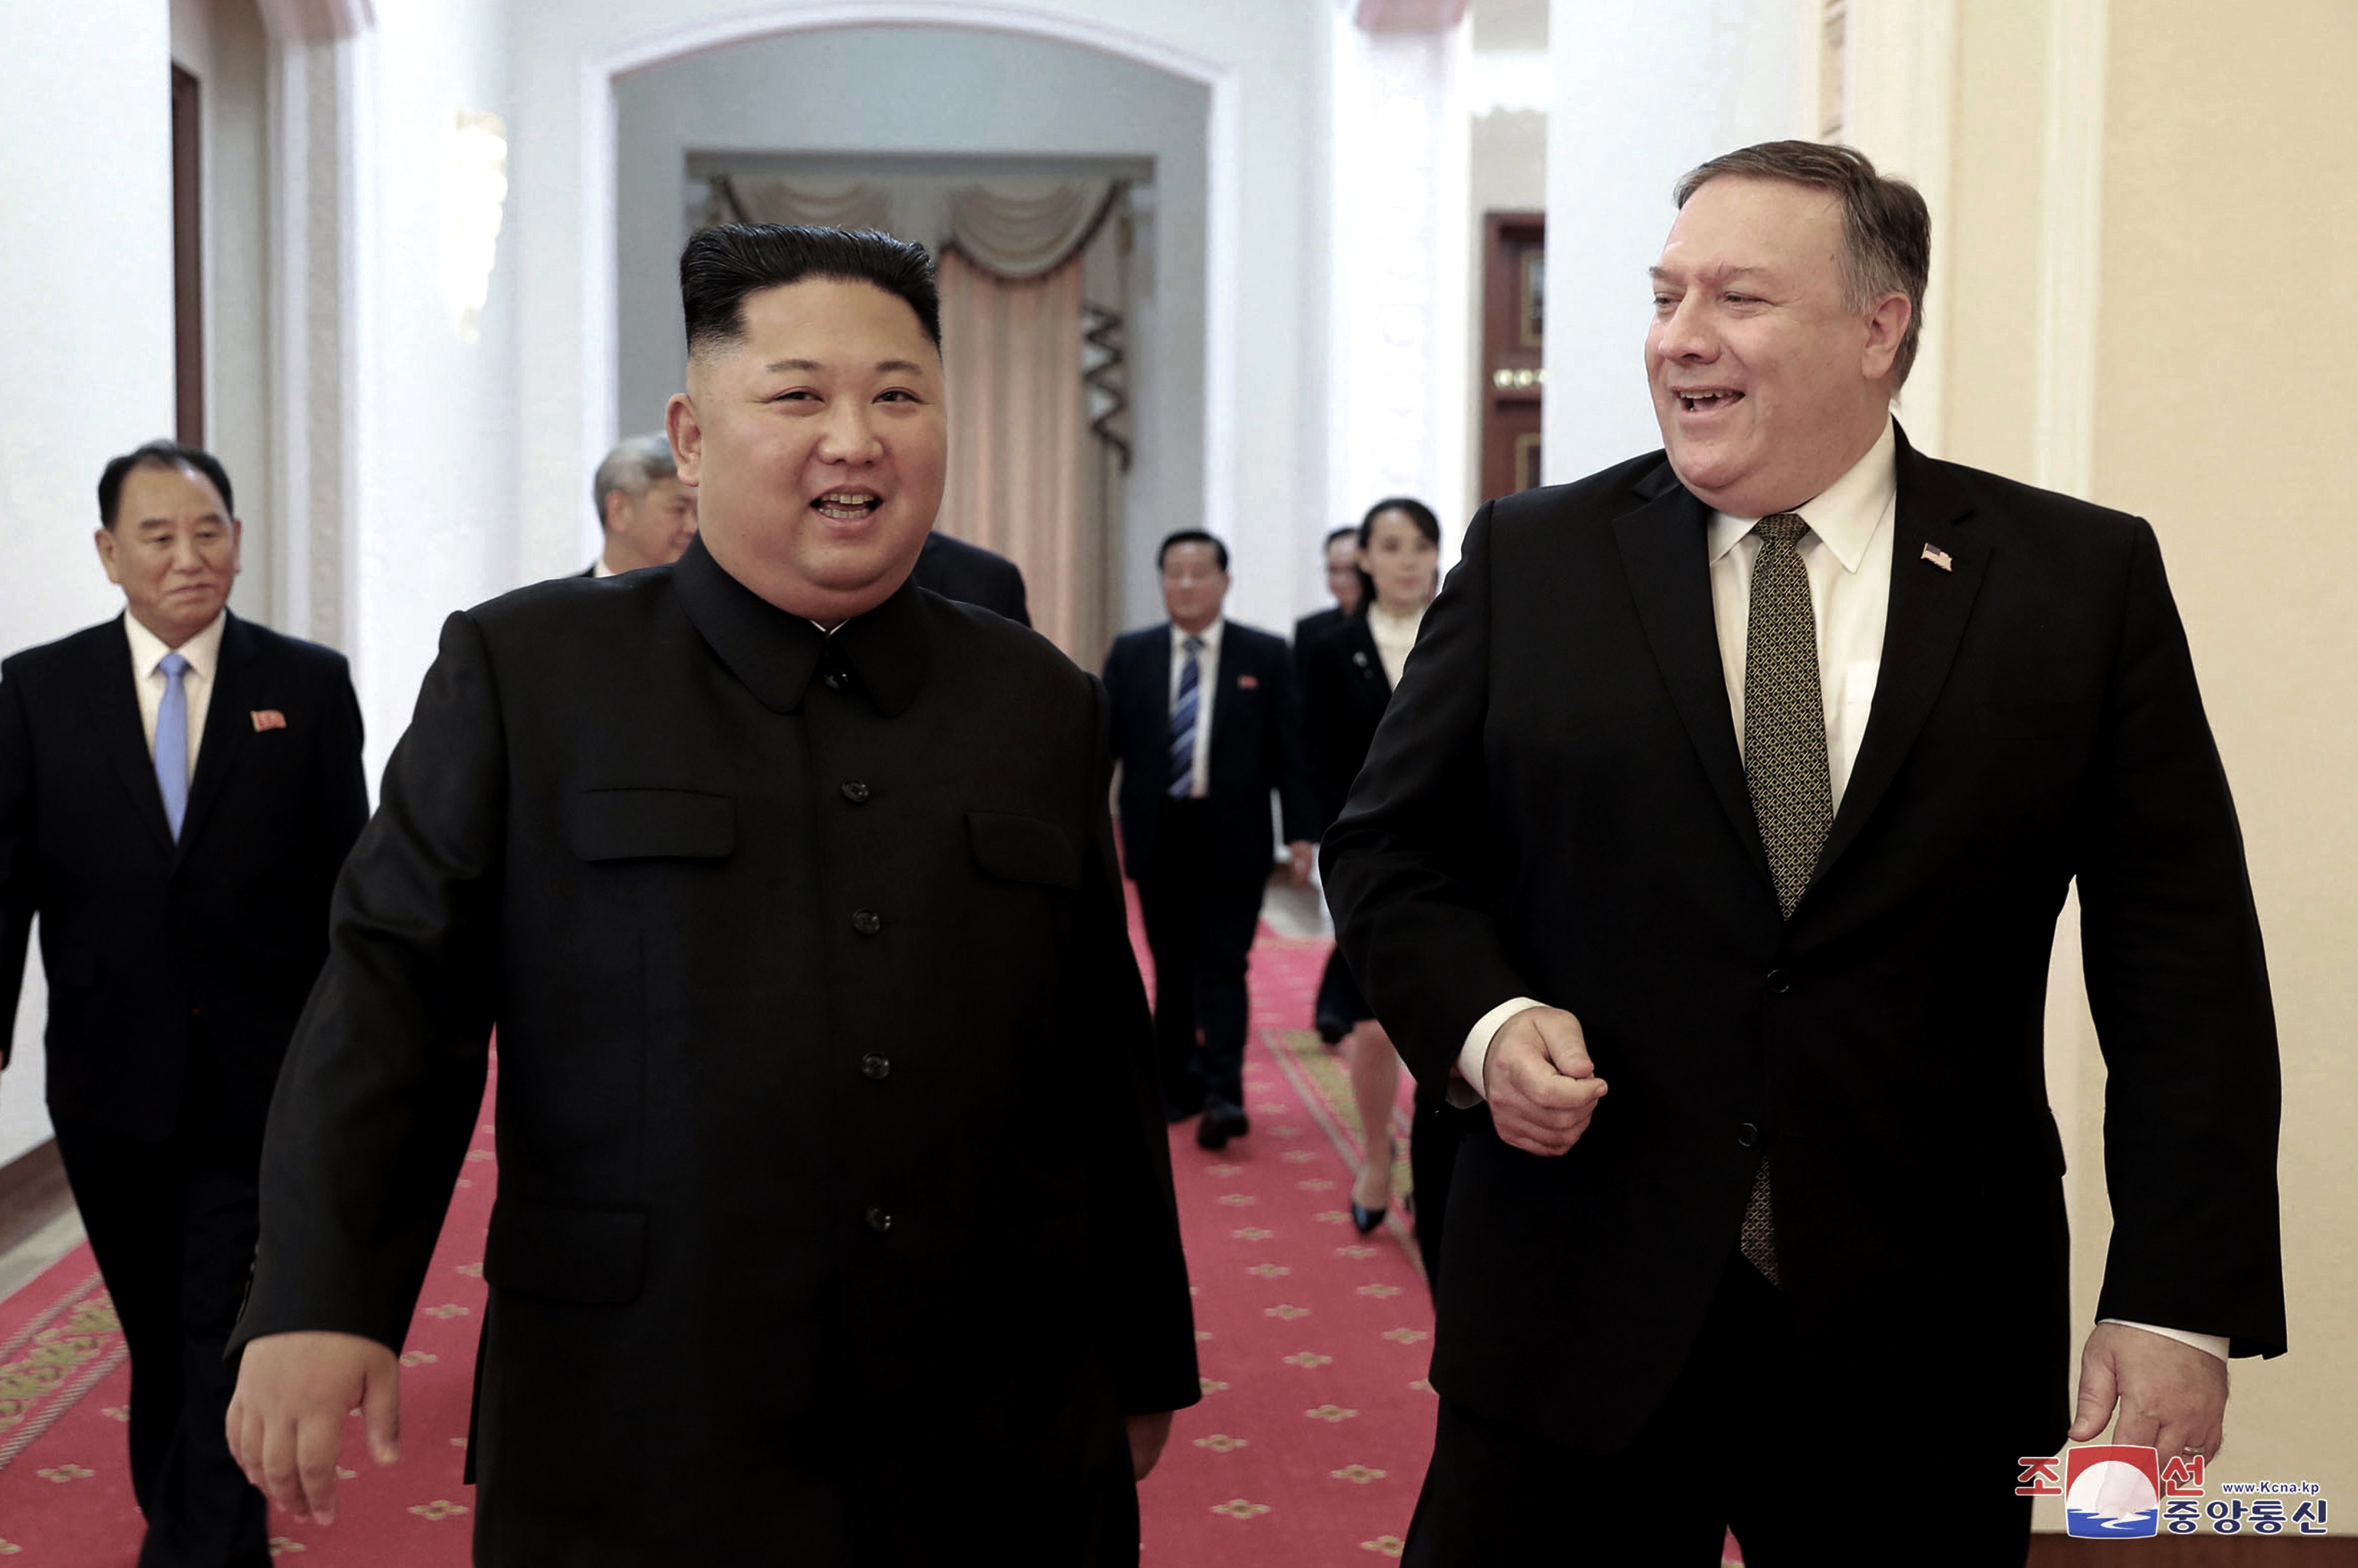 Pyongyang did not hold back in blaming US Secretary of State Mike Pompeo for the stalled negotiations with the US, after two rounds of presidential-level summits. Photo: KCNA